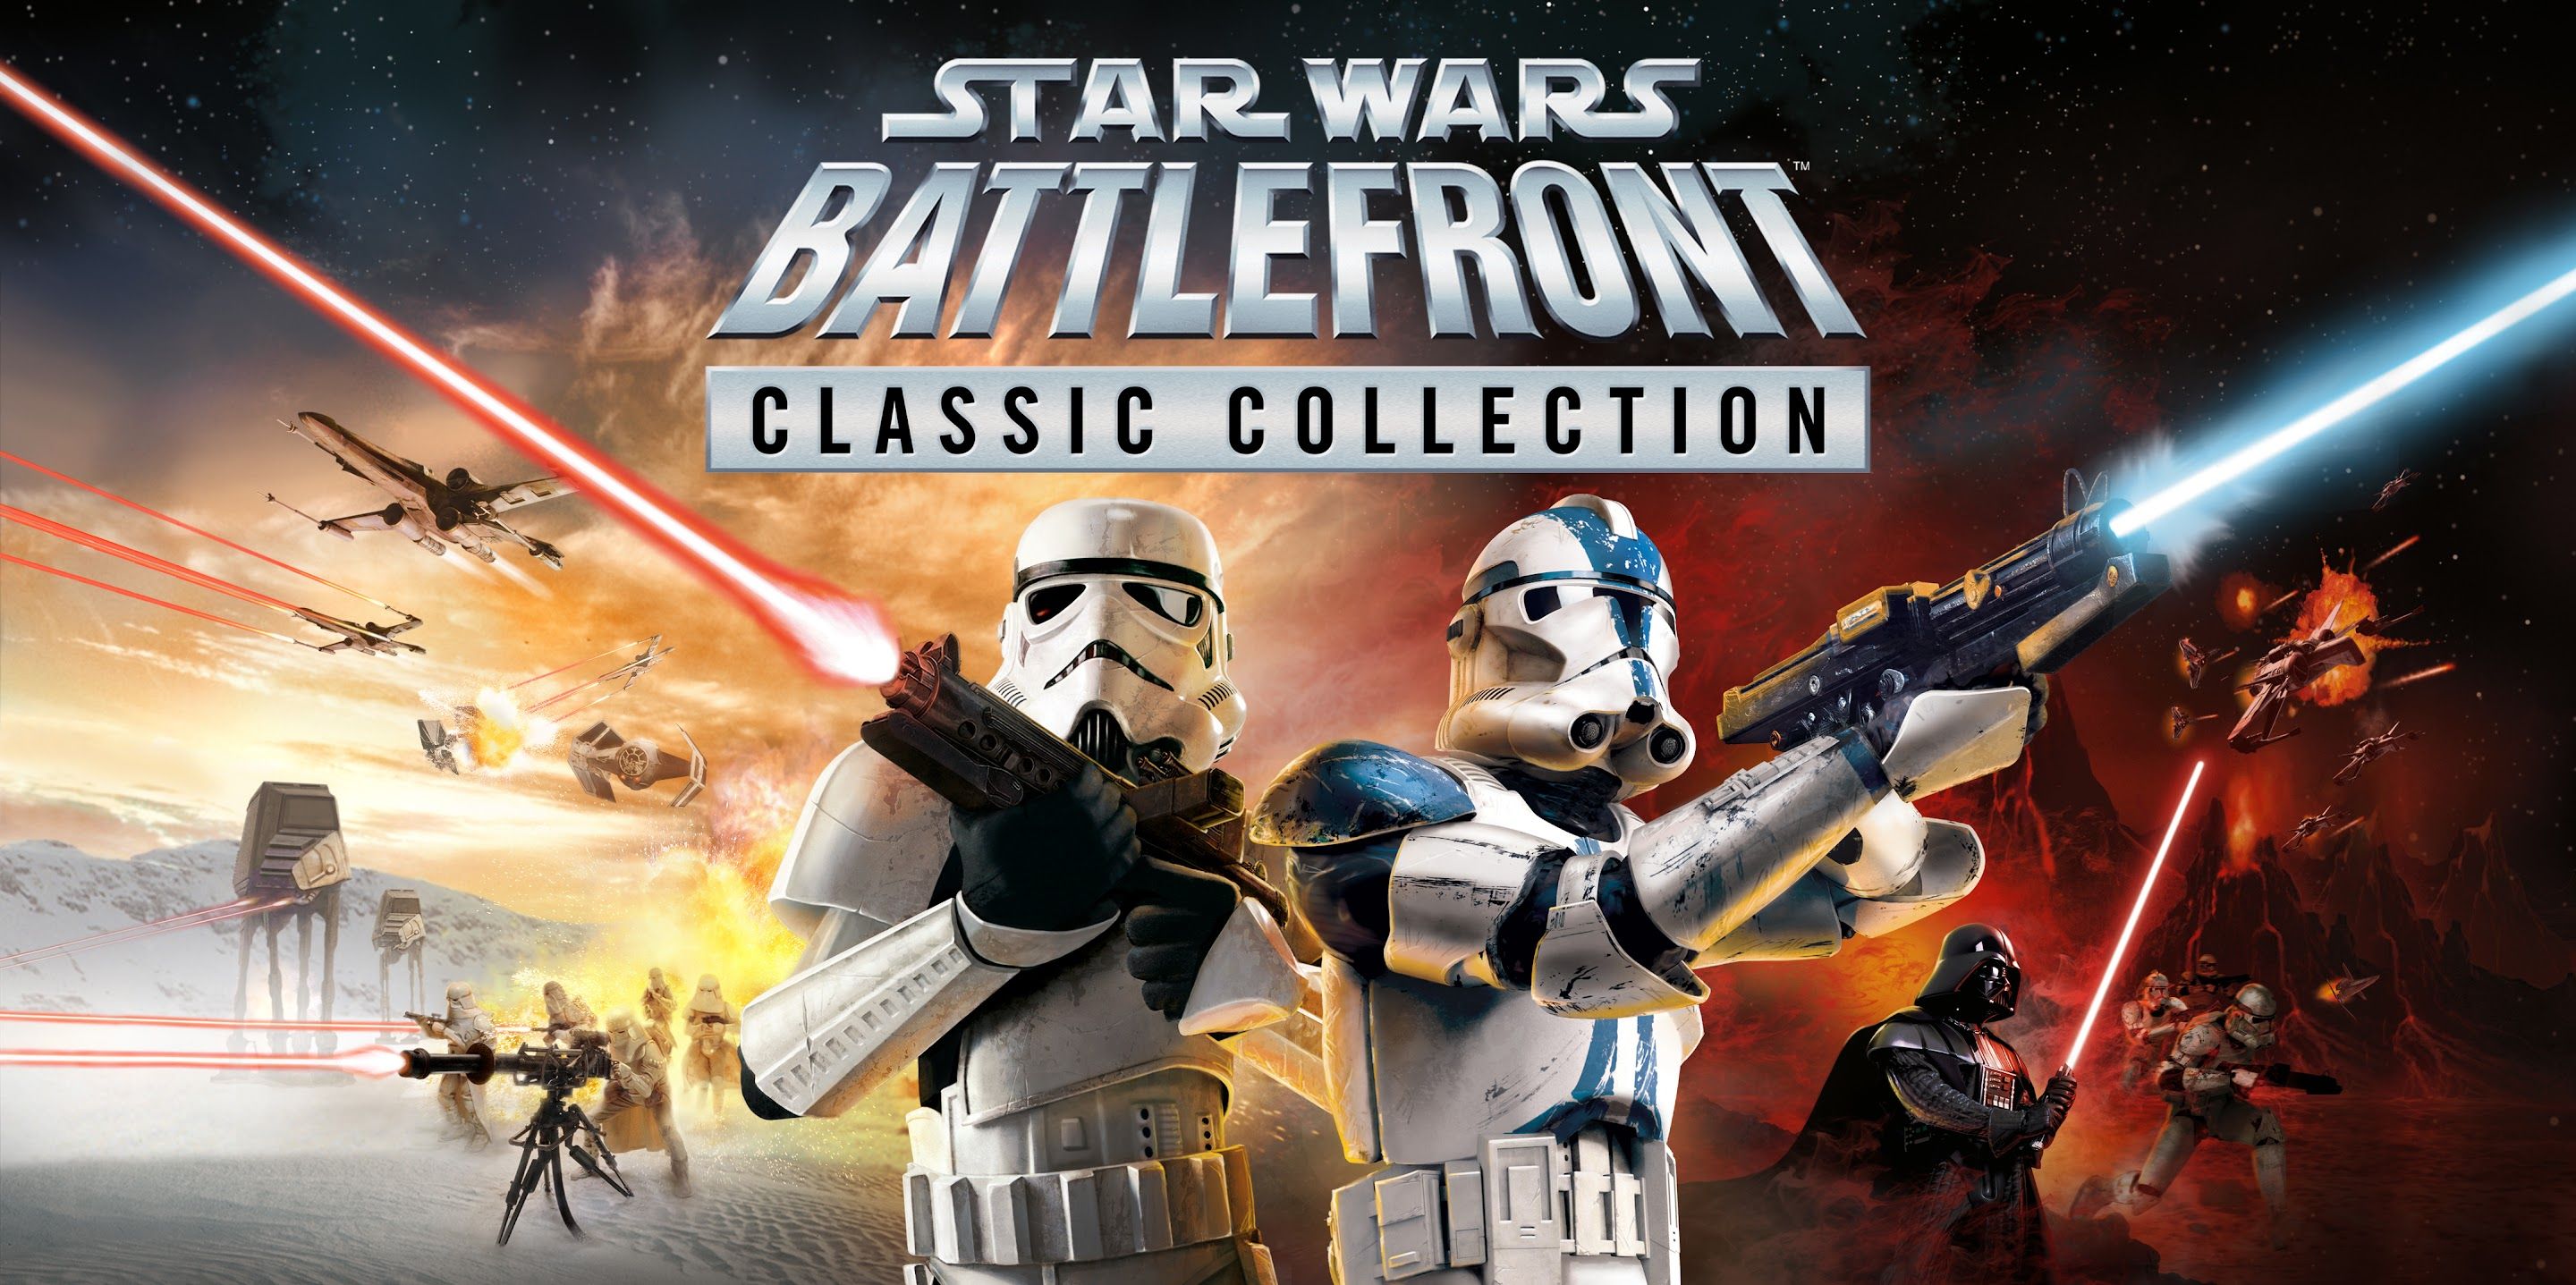 Stormtrooper and Clone Trooper from the covers of Star Wars Battlefront I and II, back to back, in front of the Star Wars Battlefront Classic Collection title